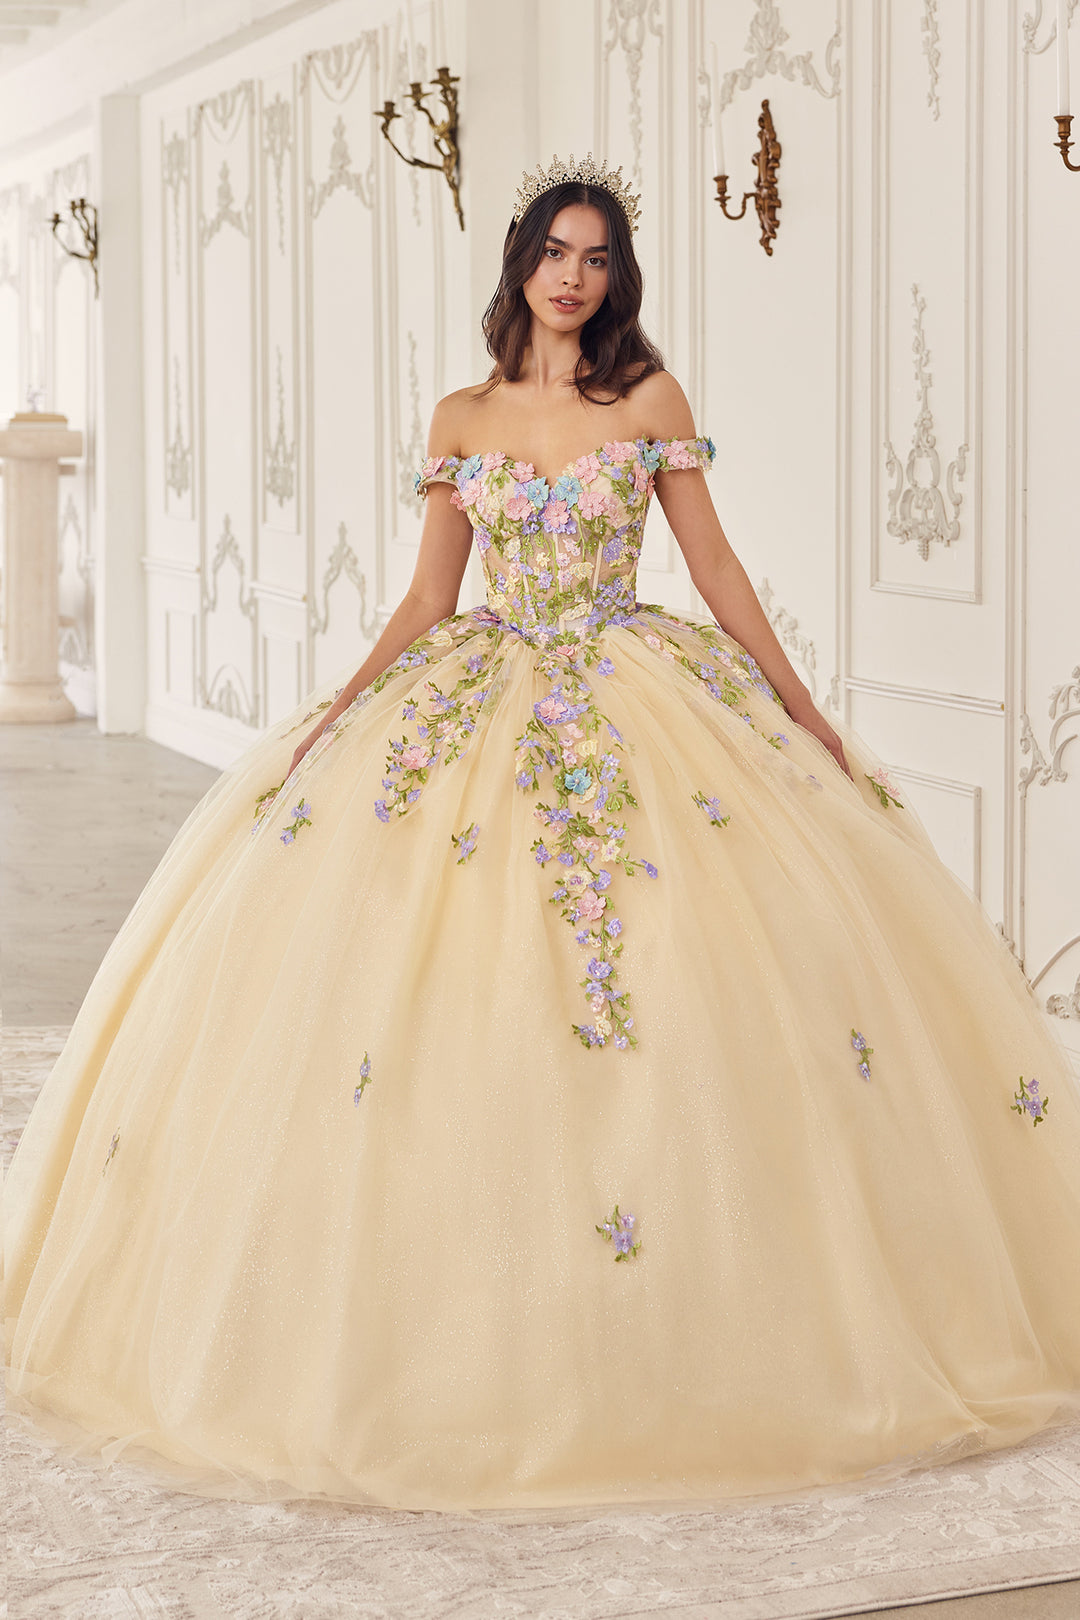 Multi-Color Floral Off Shoulder Ball Gown by Ladivine 15724